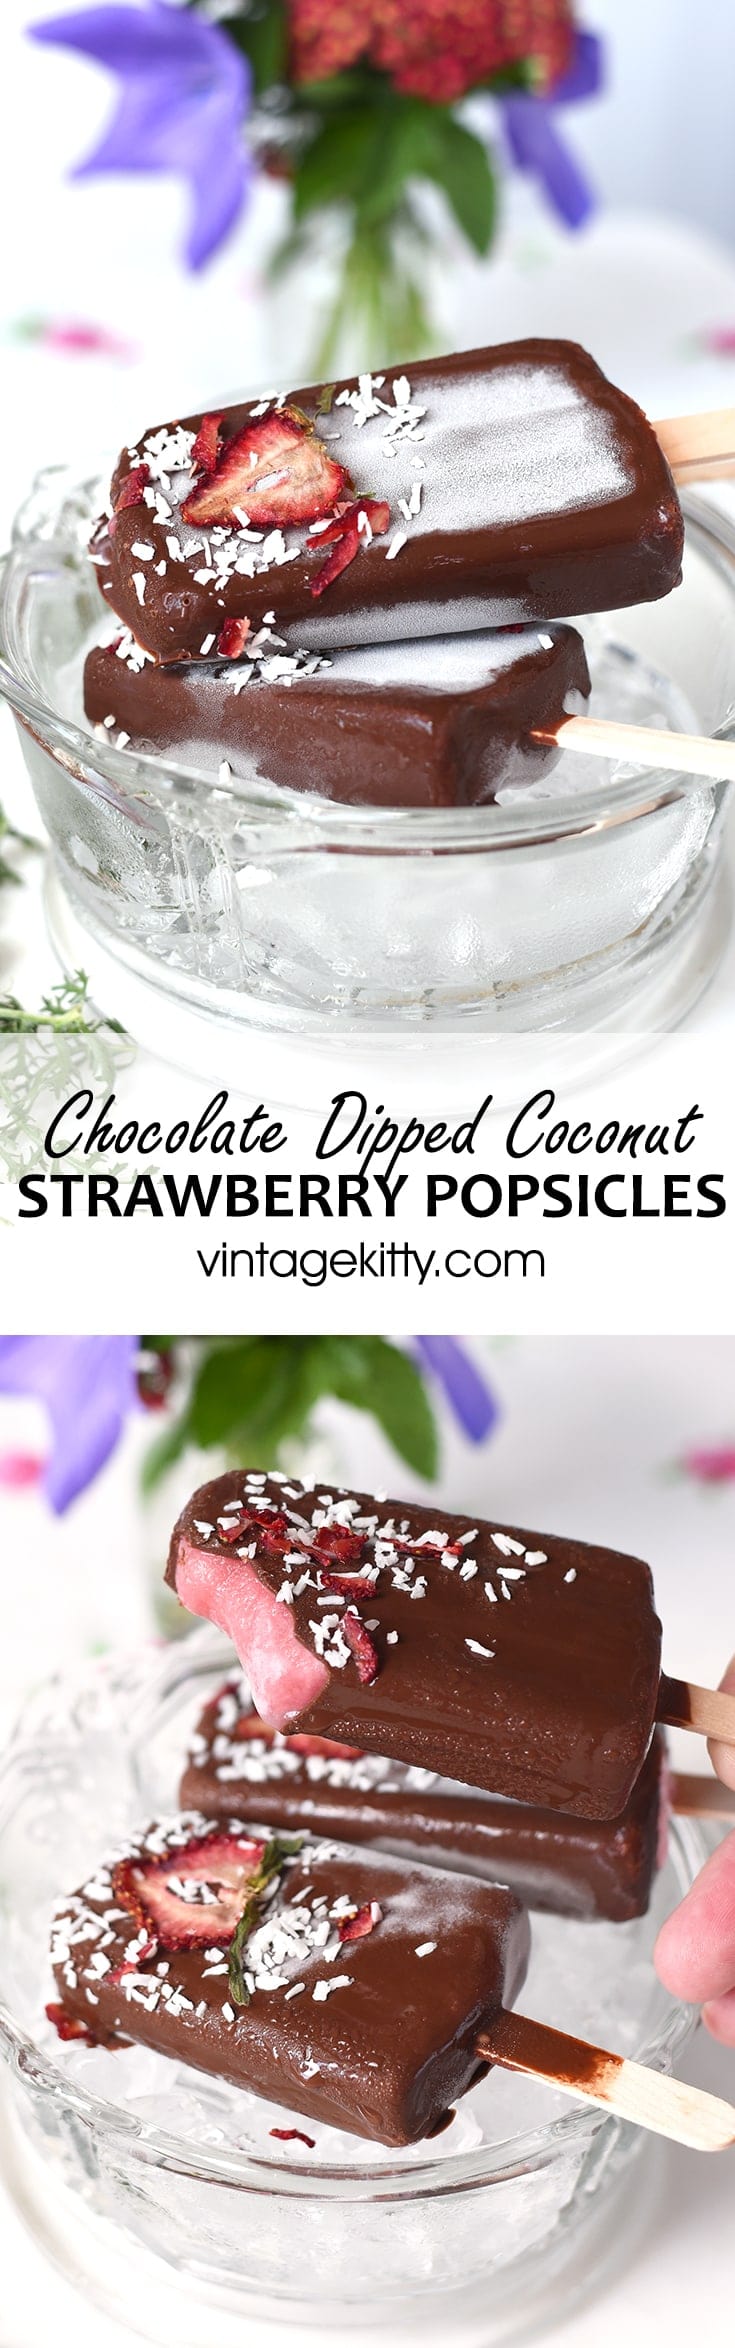 Chocolate Dipped Stawberry Coconut Popsicles Pin - Chocolate Dipped Strawberry Coconut Popsicles